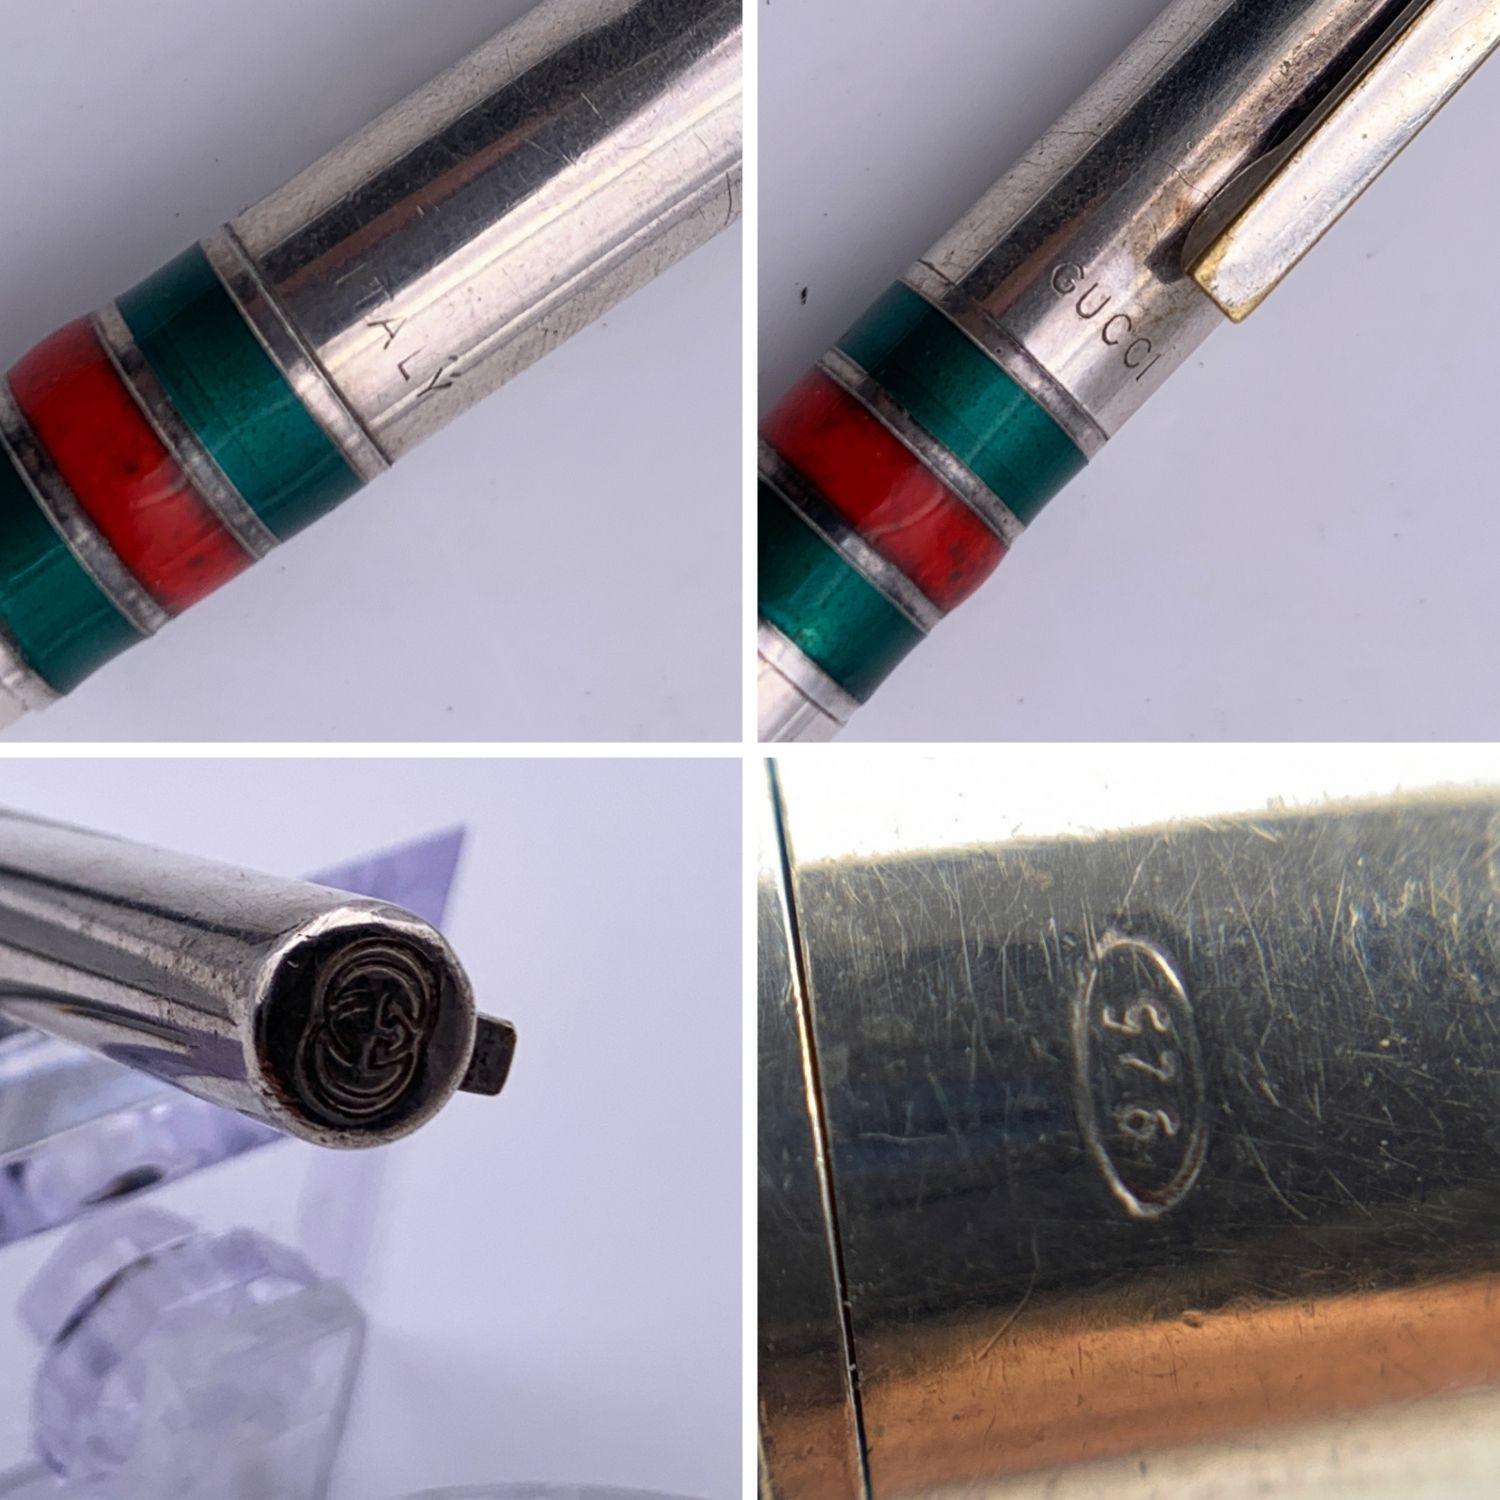 Vintage ballpoint pen by Gucci. Made of sterling silver metal with green/red/green enameled details. It features GG logo on the top. Total length: 5.5 inches - 14 cm. Marked 'Gucci' on the pen. '925' hallmark engraved on the pen

Details

MATERIAL: